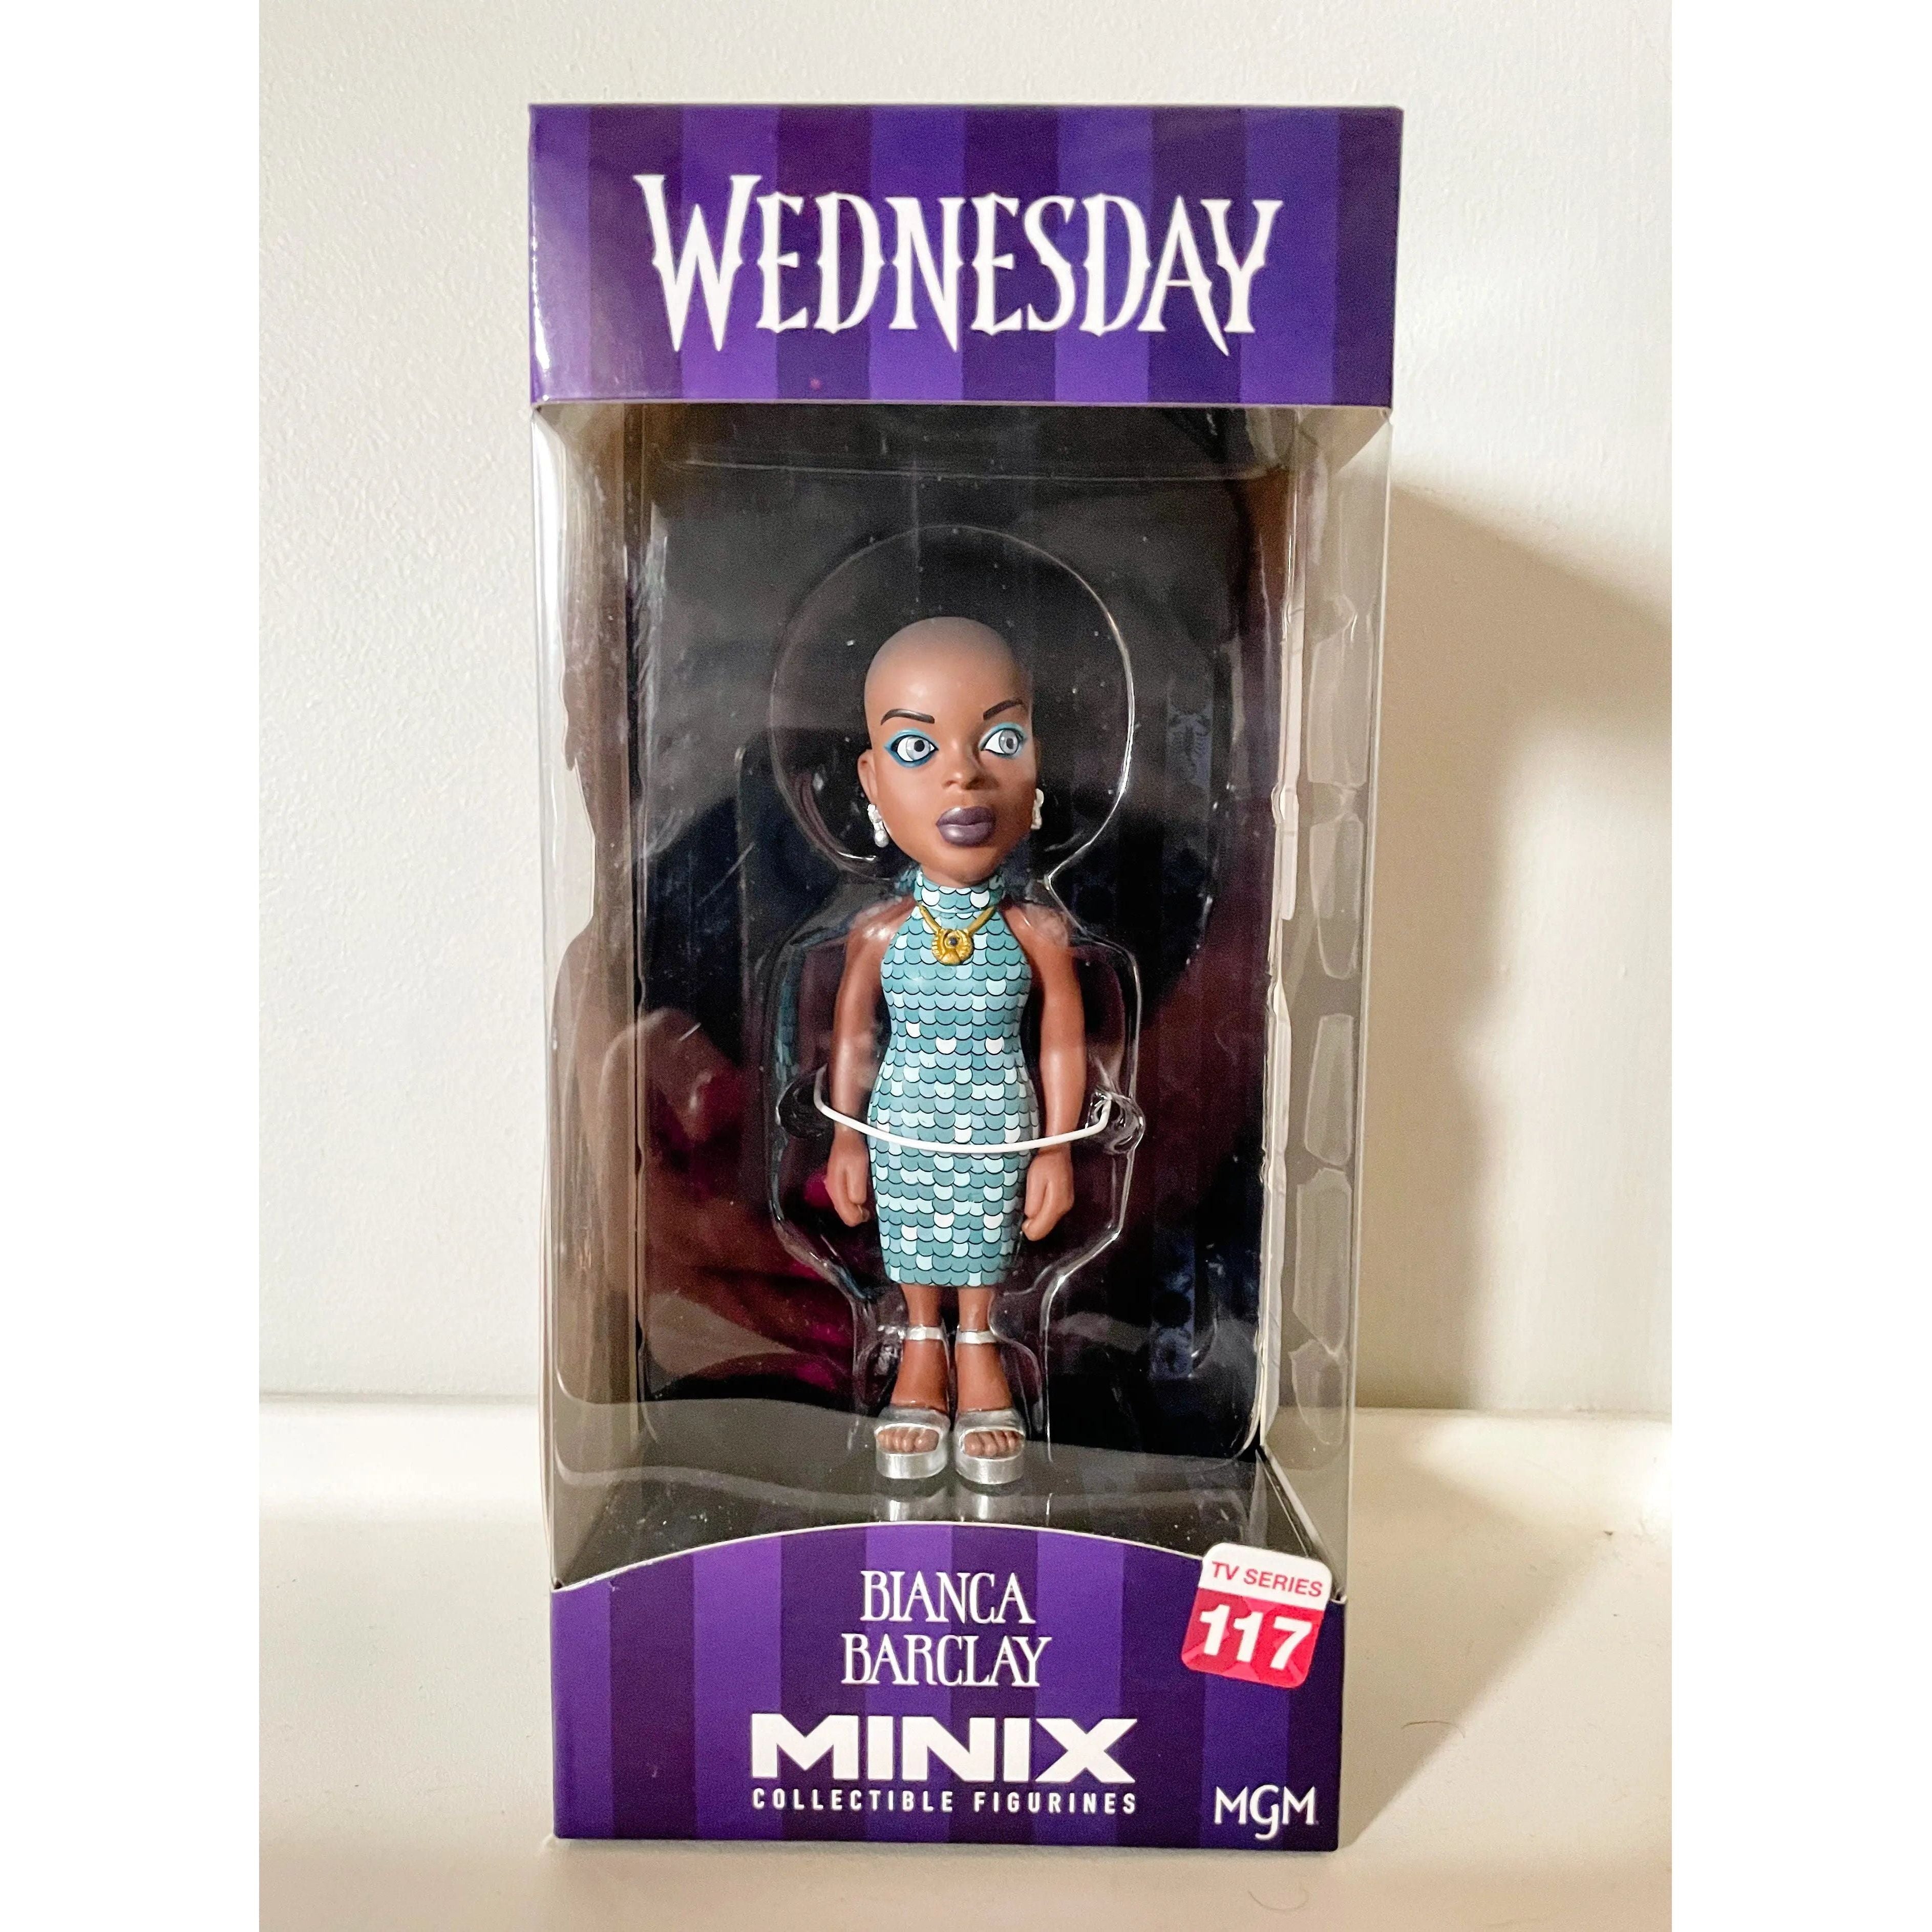 MINIX Wednesday Wednesday with Thing